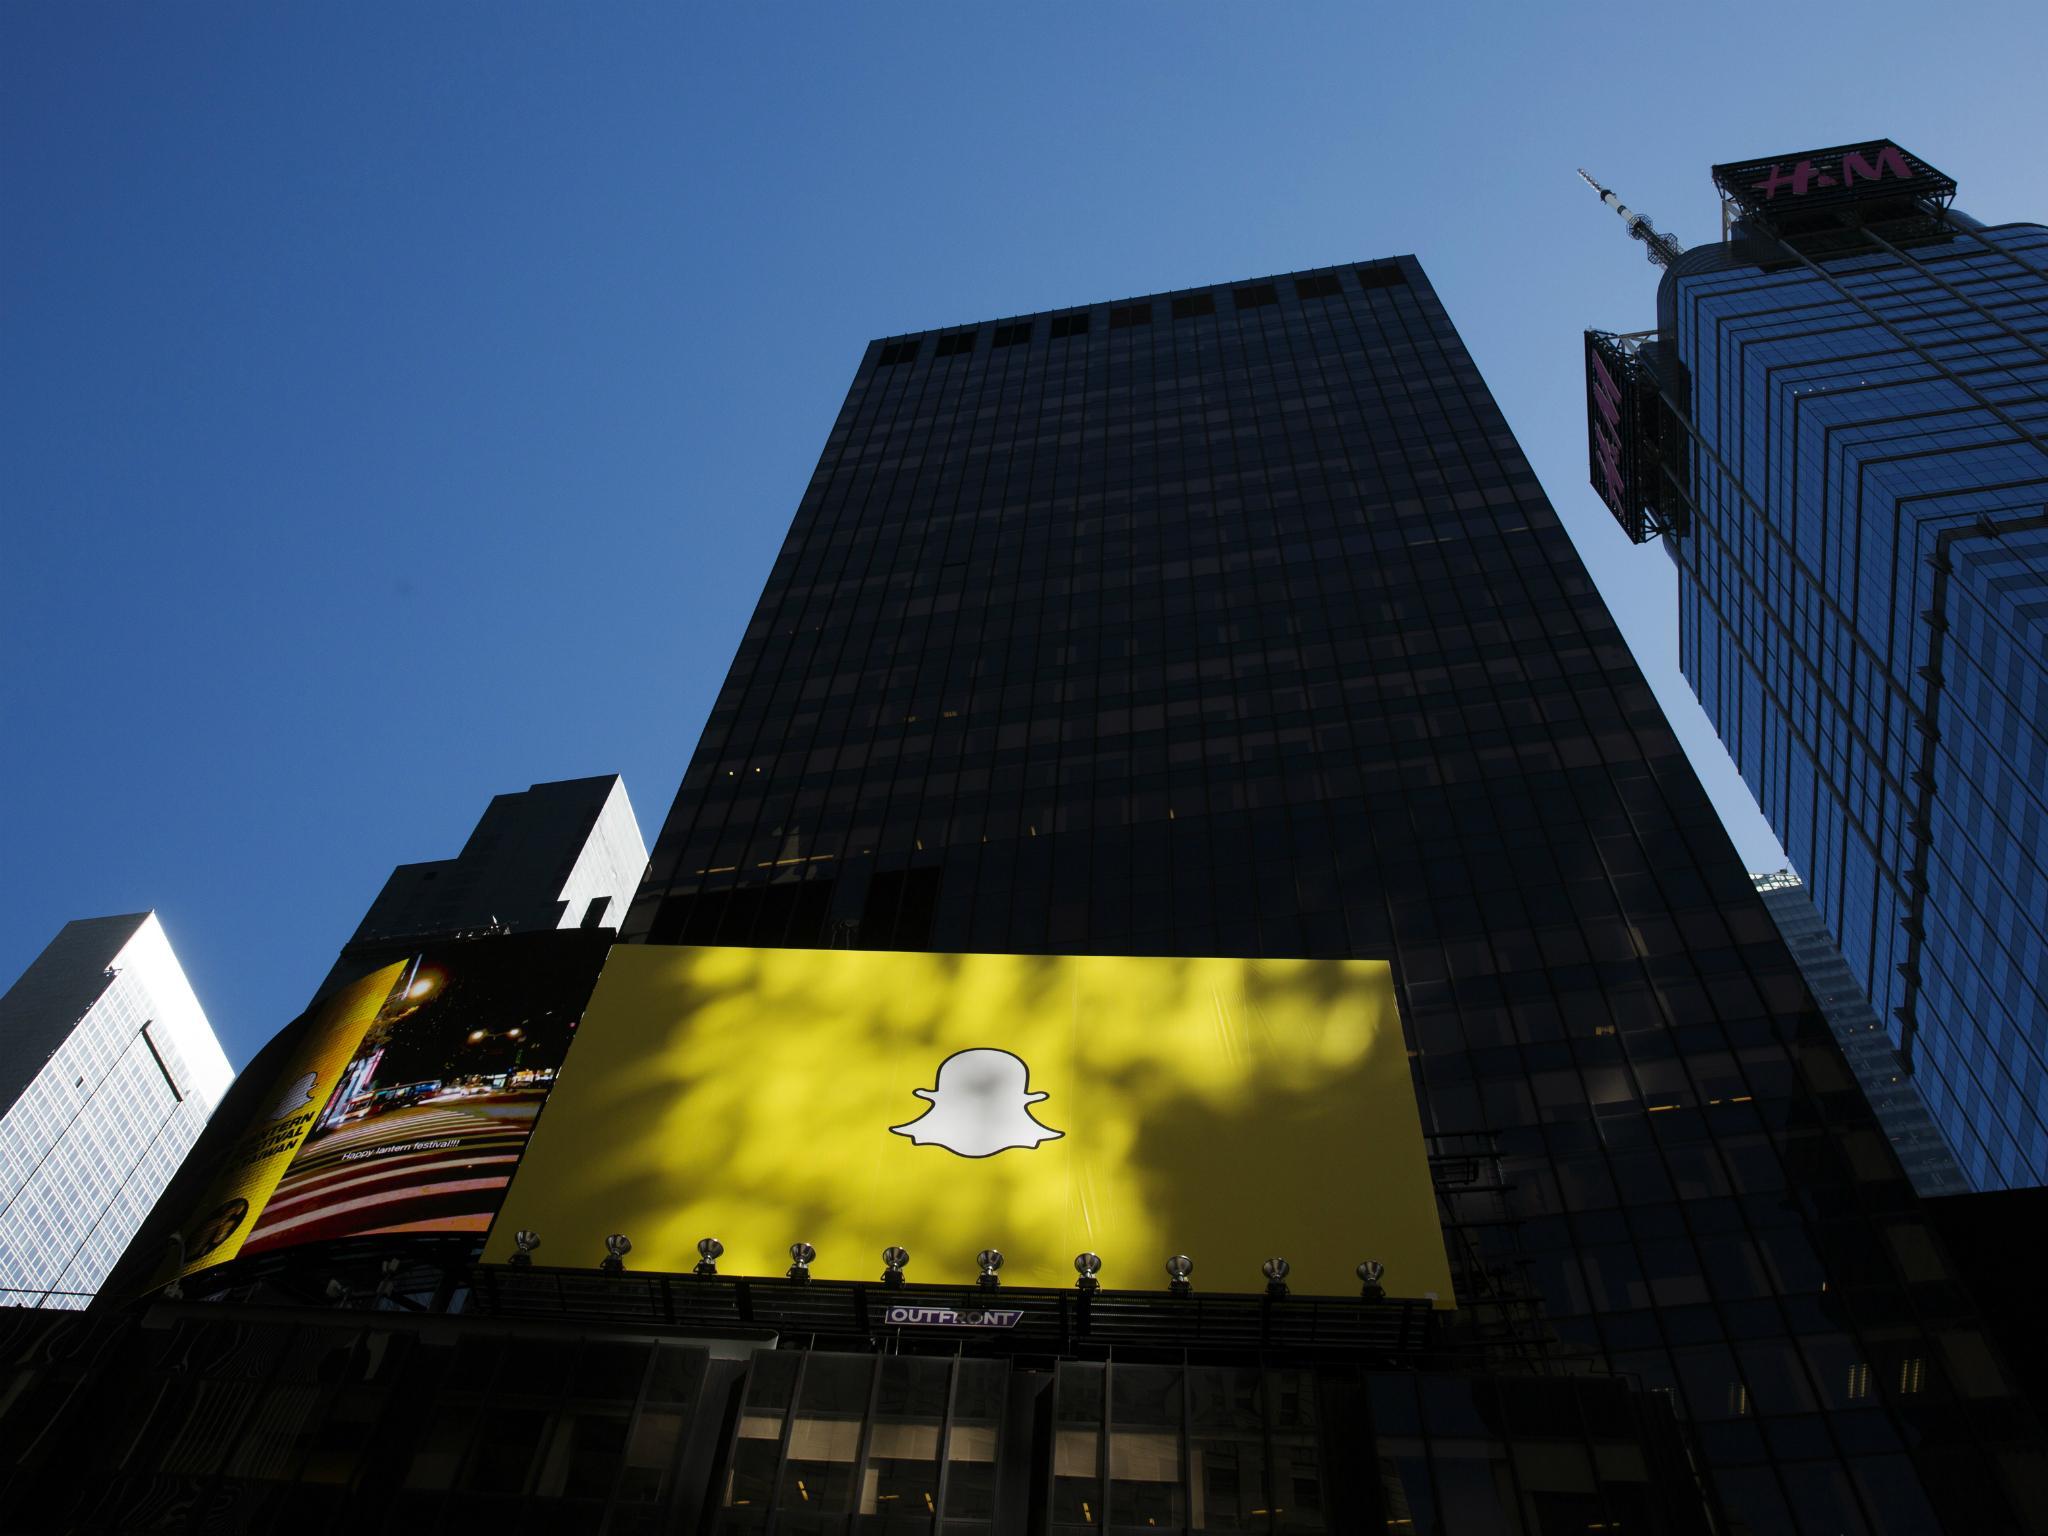 A billboard displays the logo of Snapchat above Times Square in New York March 12, 2015